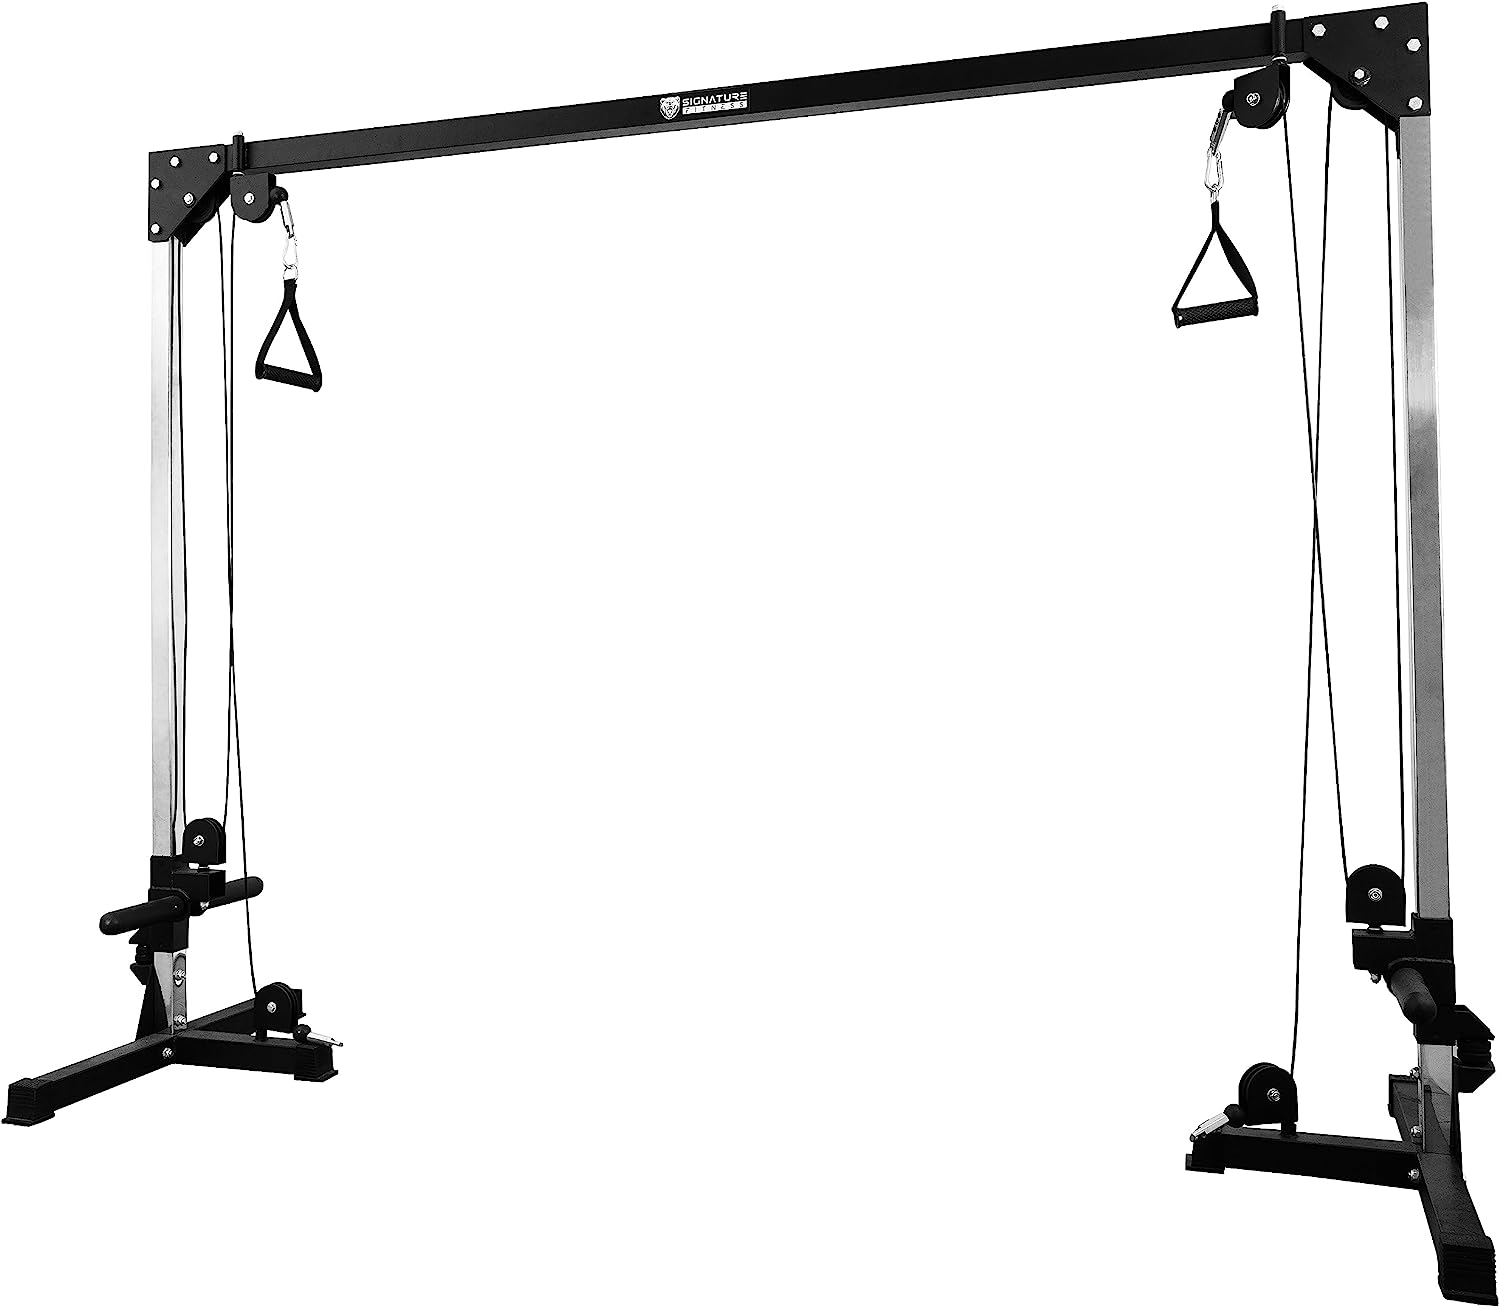 Signature Fitness Multifunctional Home Gym System [...]